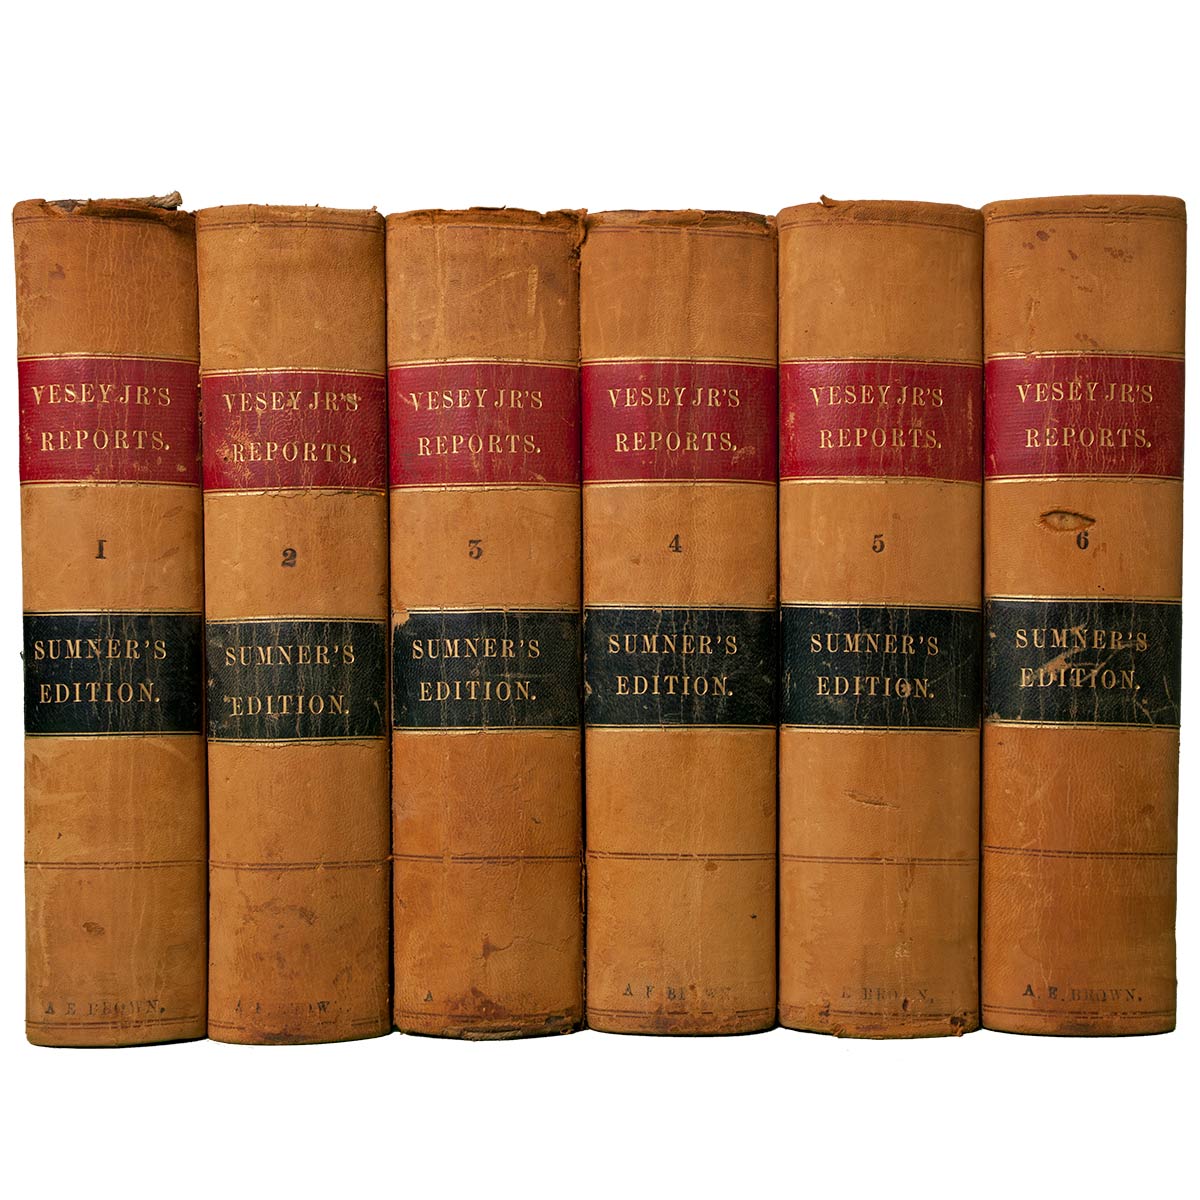 Antique Leather Law Books - Transport yourself to the luxurious aura of a traditional library with antiquated leather-bound legal texts. From the 1800s and 1900s, these aged books offer any collection a hint of classical charm. 